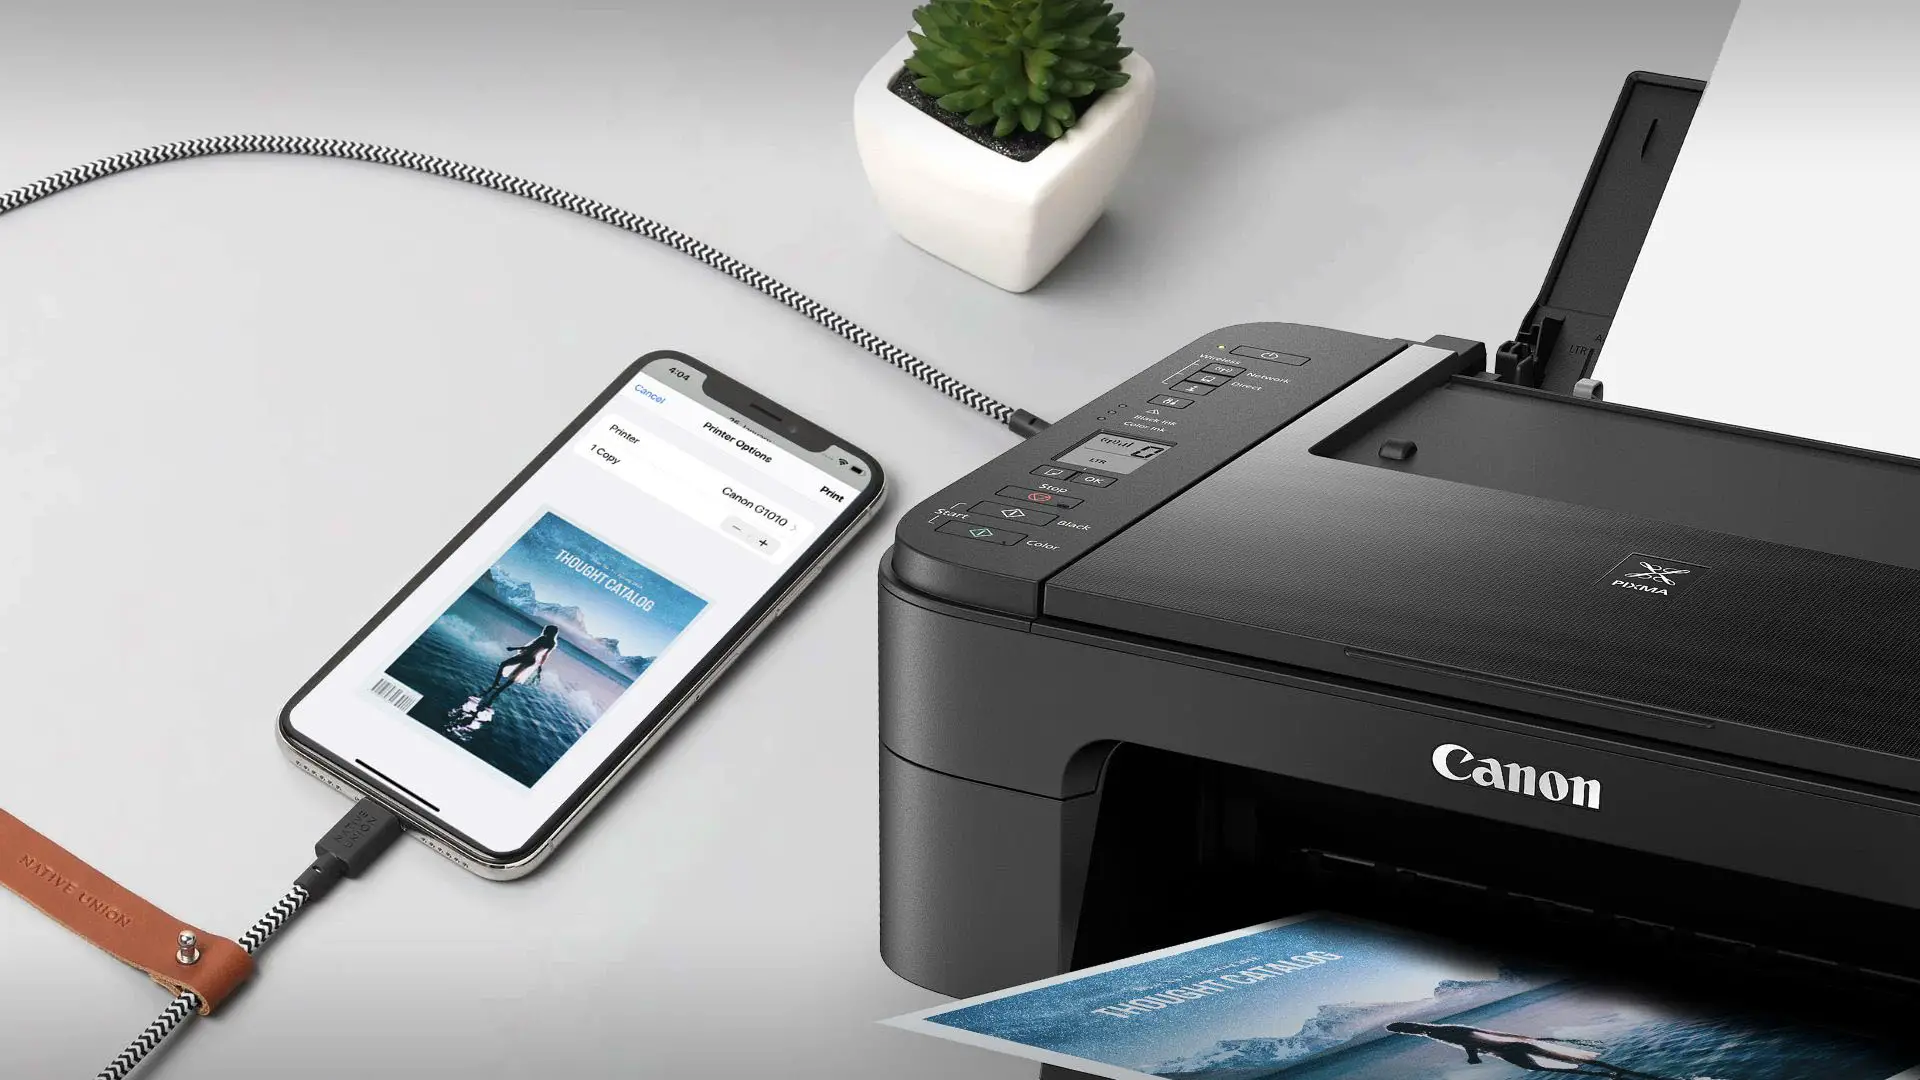 Connect canon printer to iPhone using USB cable